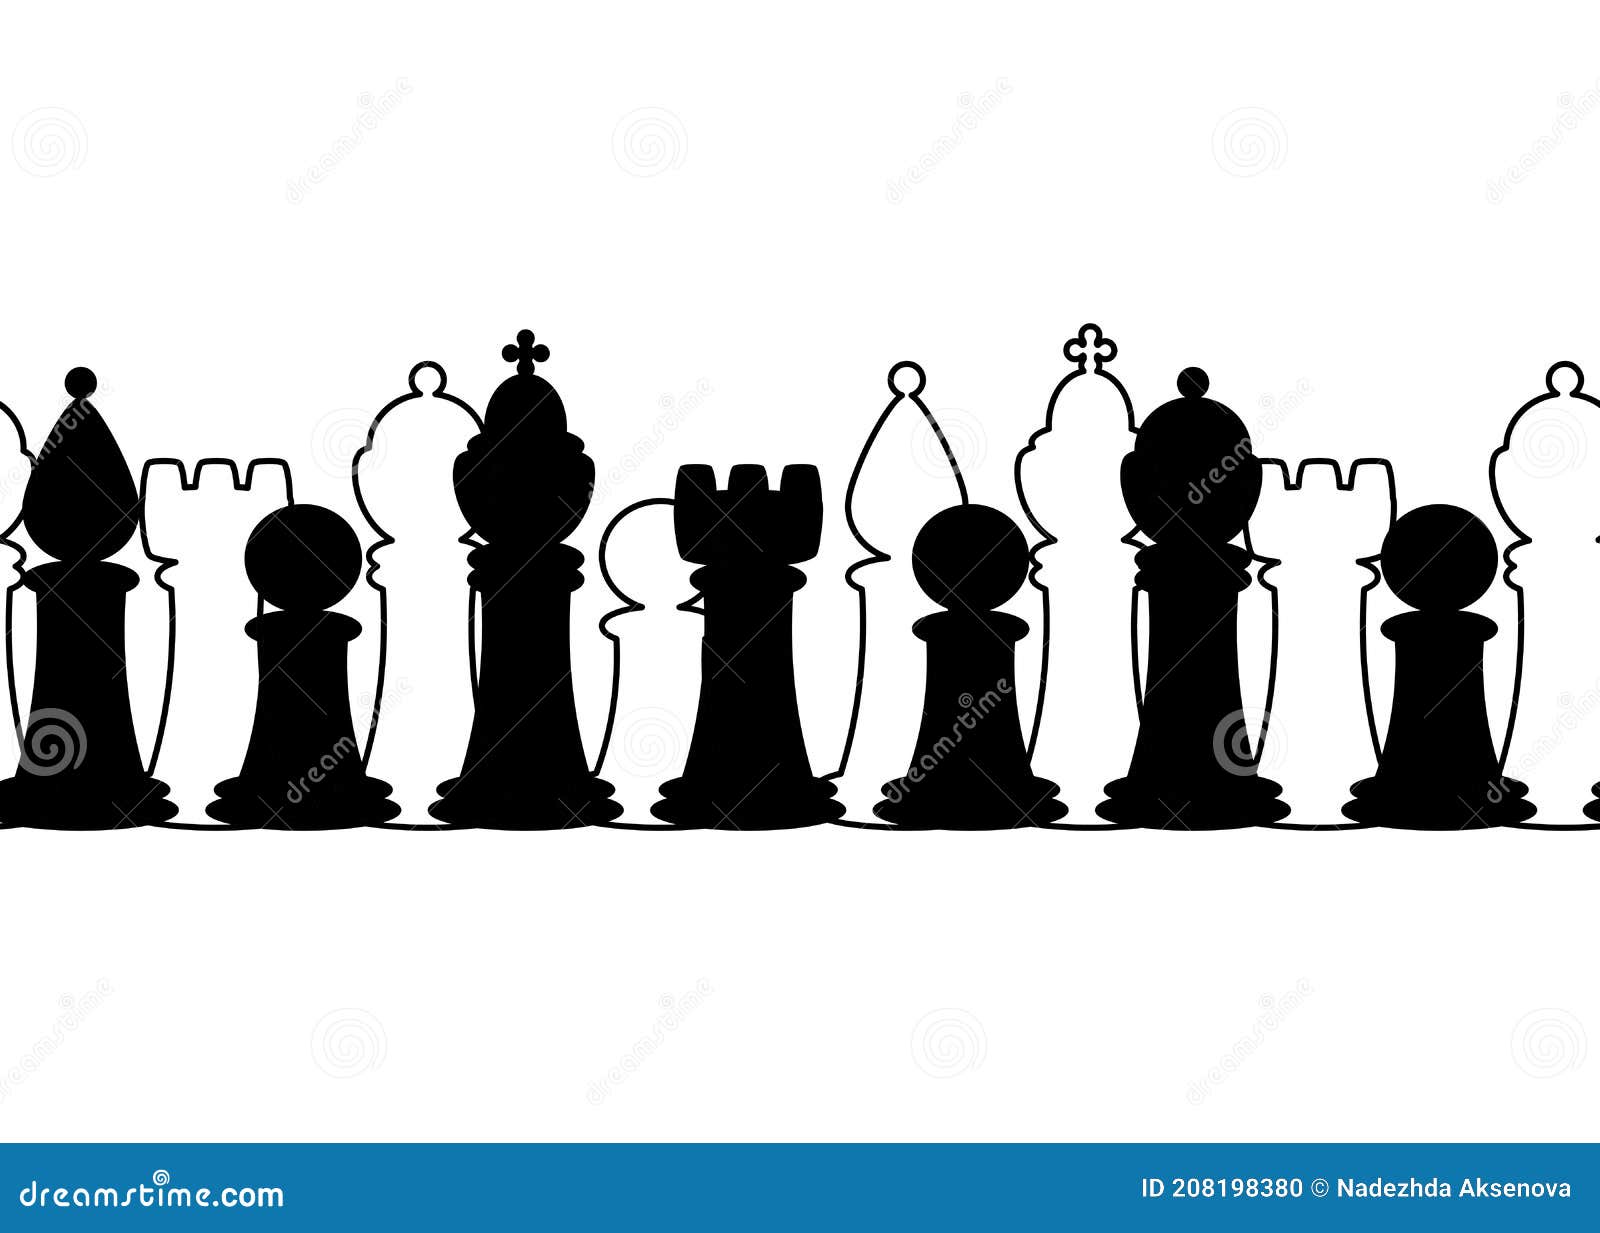 Chess rook Royalty Free Vector Image - VectorStock